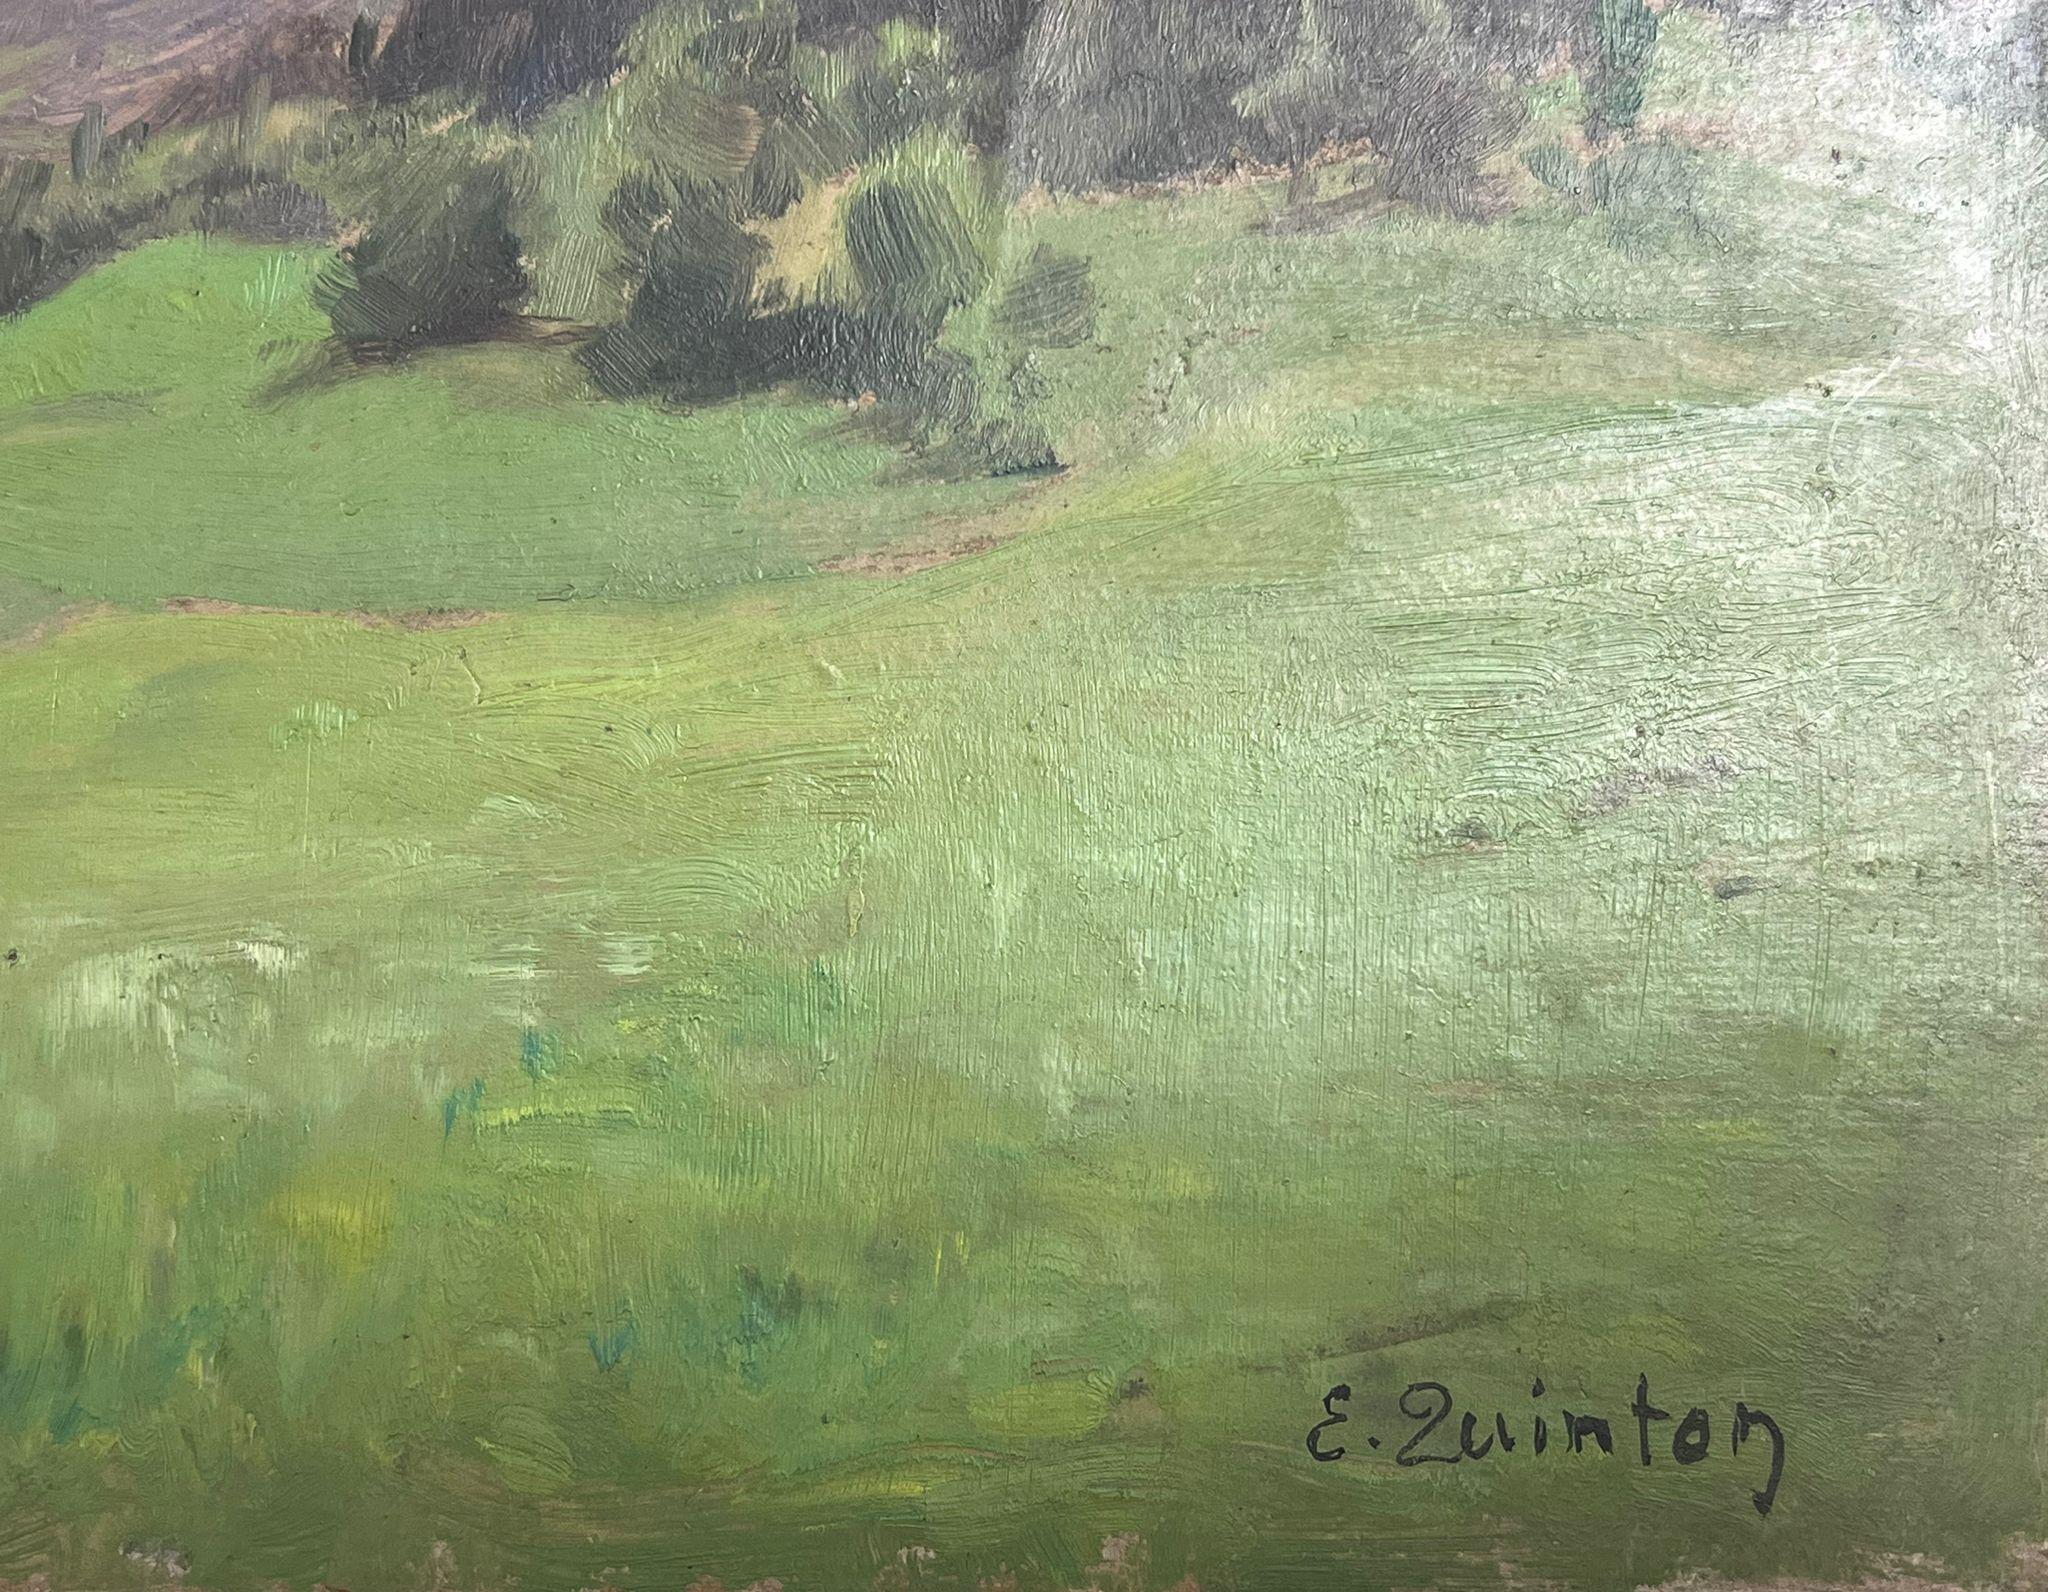 French Countryside Landscape
by Edmond Quinton (French 1892-1969) *see notes below
signed lower front corner
oil painting on board/ panel, unframed
size: 9.5 x 13 inches
condition: overall good and sound, some age related marks and old dirt, all